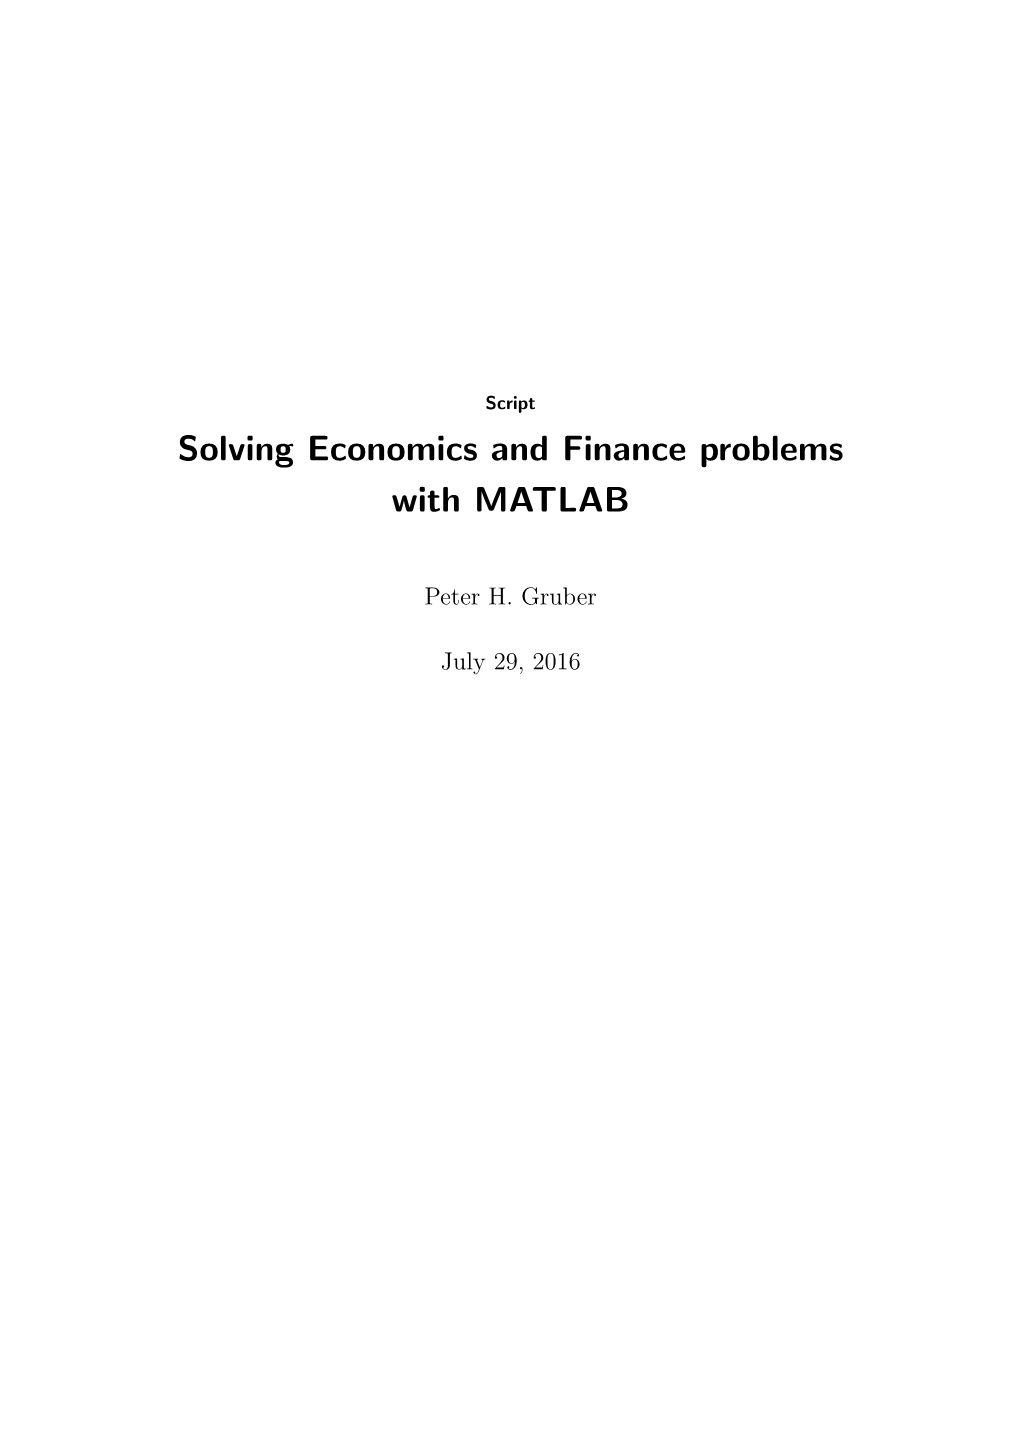 Solving Economics and Finance Problems with MATLAB